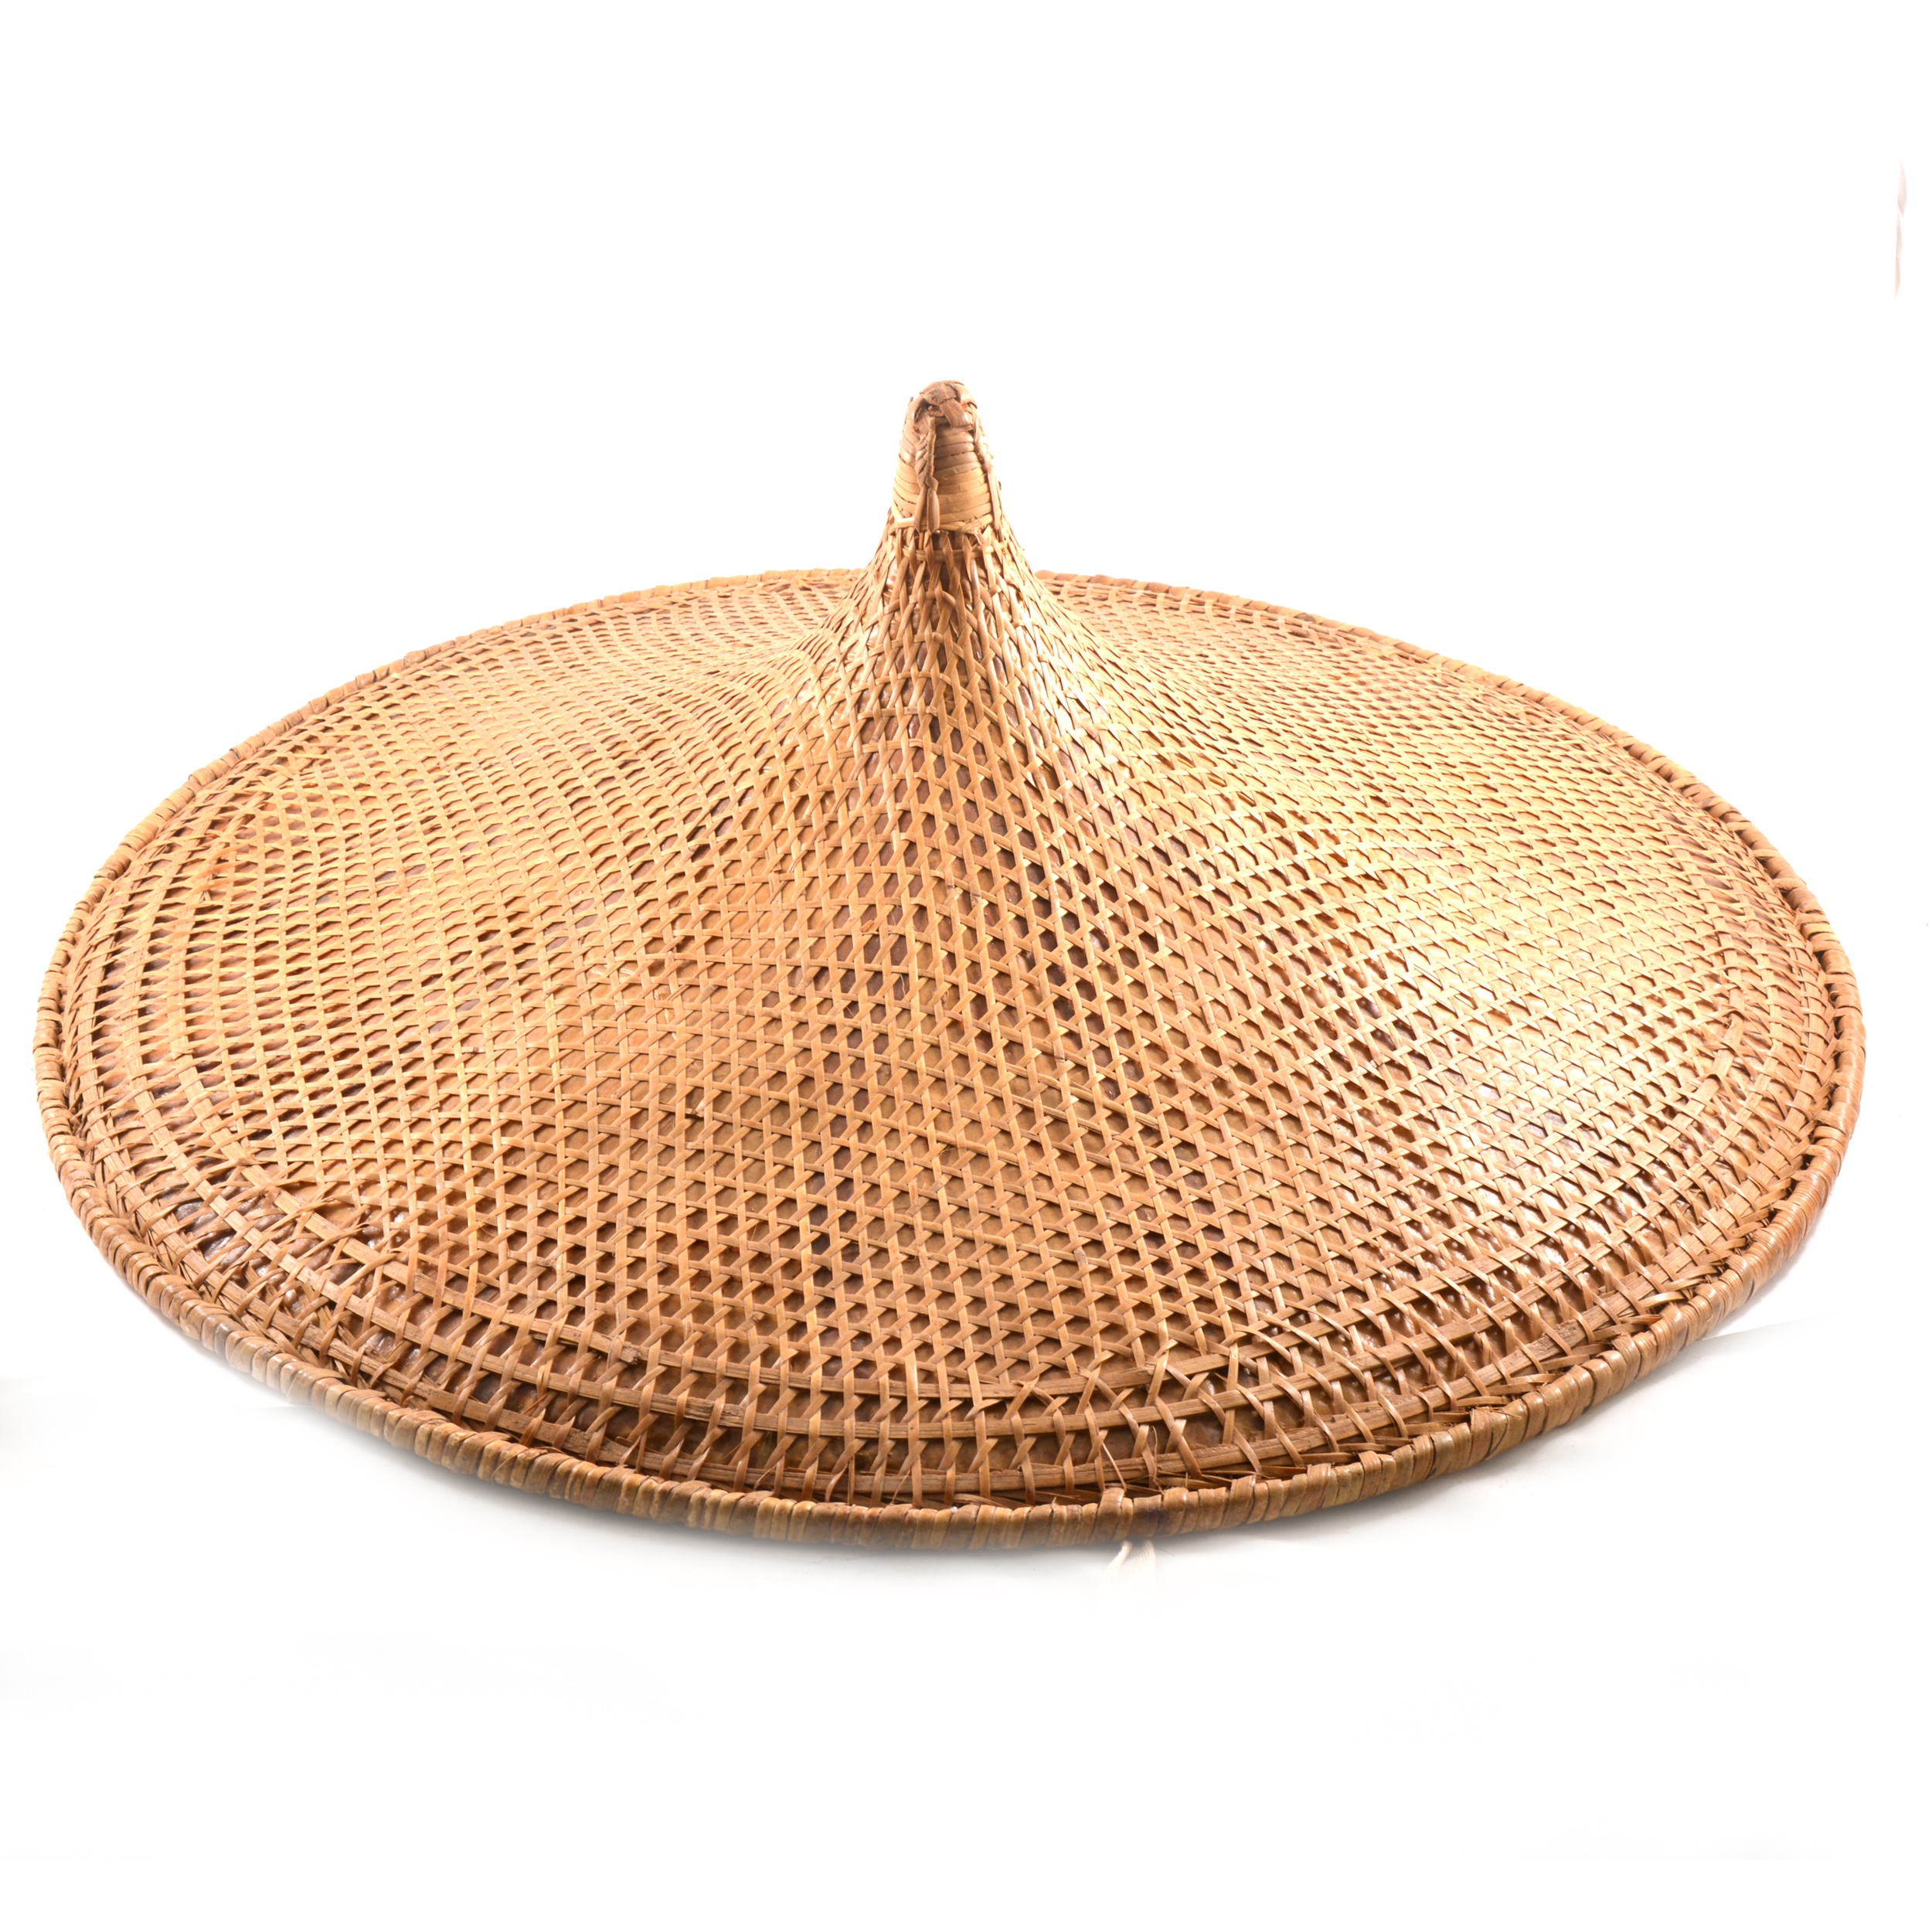 A Chinese Coolie hat.